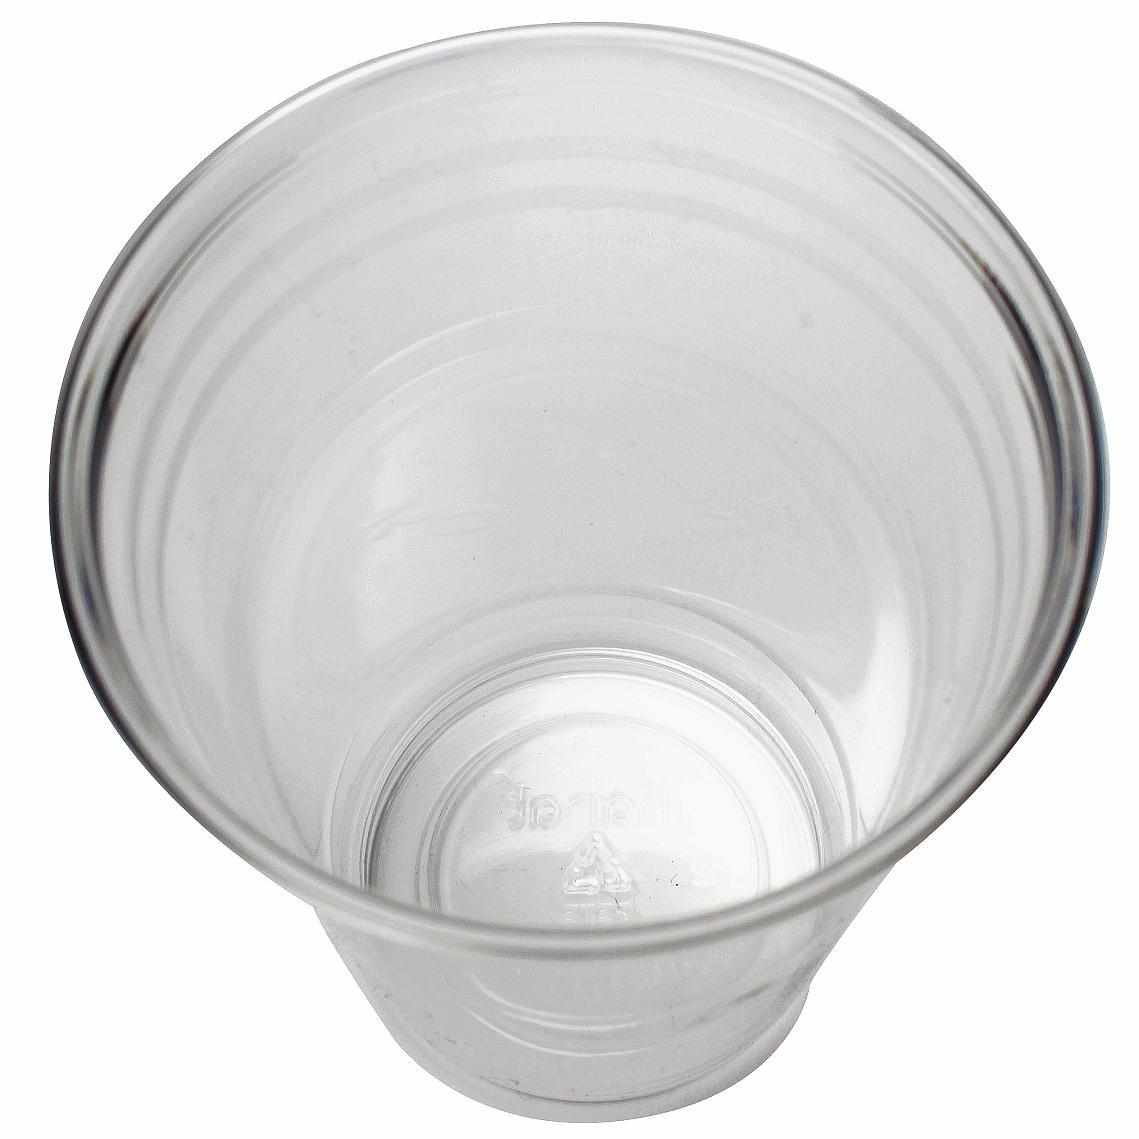 Bev Tek 16 oz Round Frosted Clear Plastic Hot / Cold Drinking Cup - 3 1/2  x 3 1/2 x 5 1/4 - 100 count box